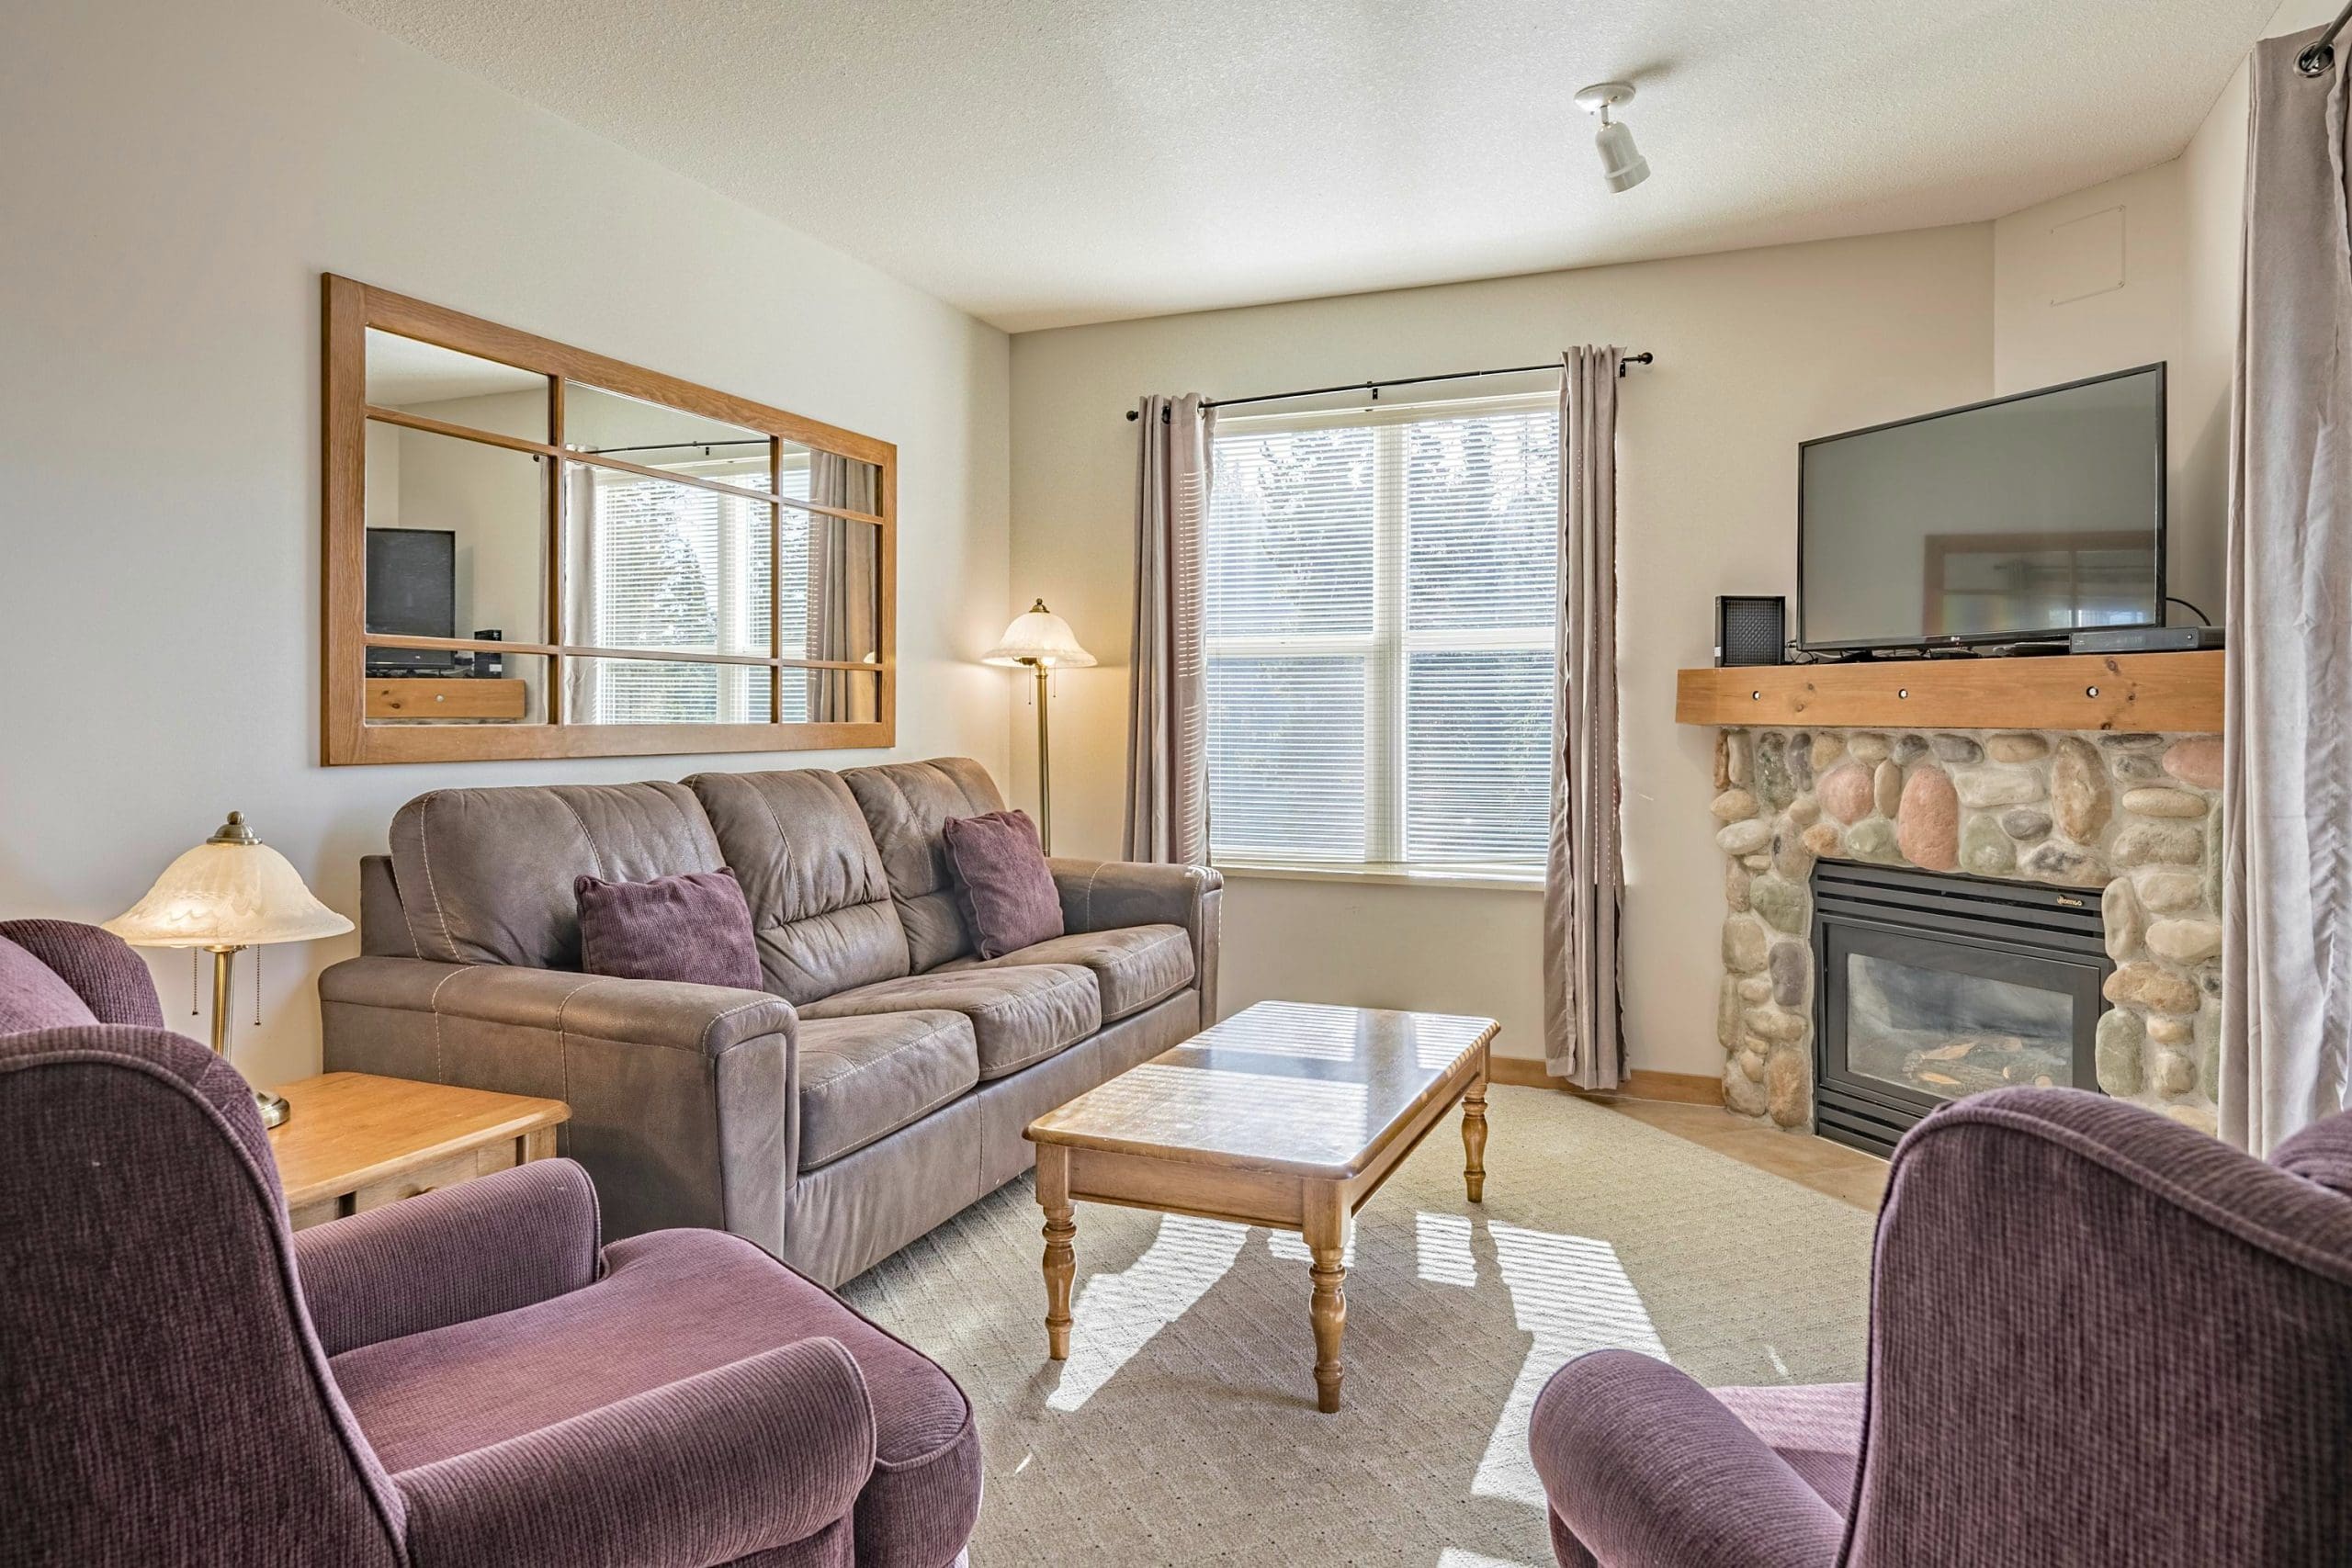 Cozy corner 3rd floor condo with bright large windows, deck with BBQ, gas fireplace, TV. This building is at the base of the Silver Queen Chair, walk down the stairs to the ski locker and you're on the skiway.